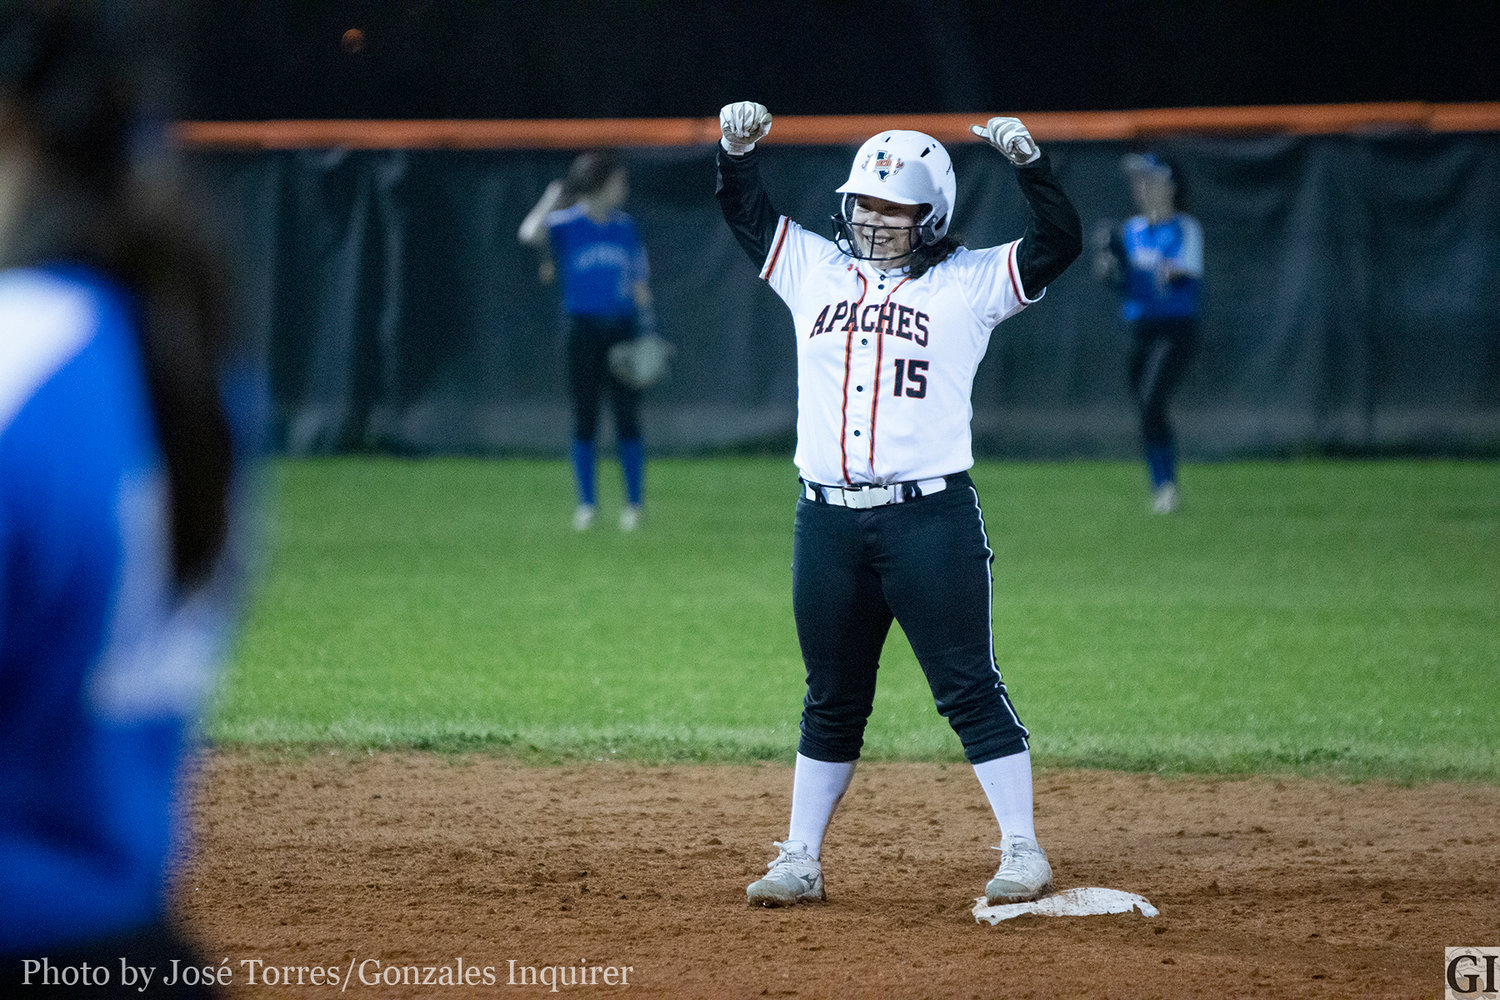 Freshman Josselyn Estrada (15) celebrates an RBI double that sparked a scoring run in the bottom of the second inning for the Lady Apaches. Gonzales would lose 27-5 against La Vernia last Friday.